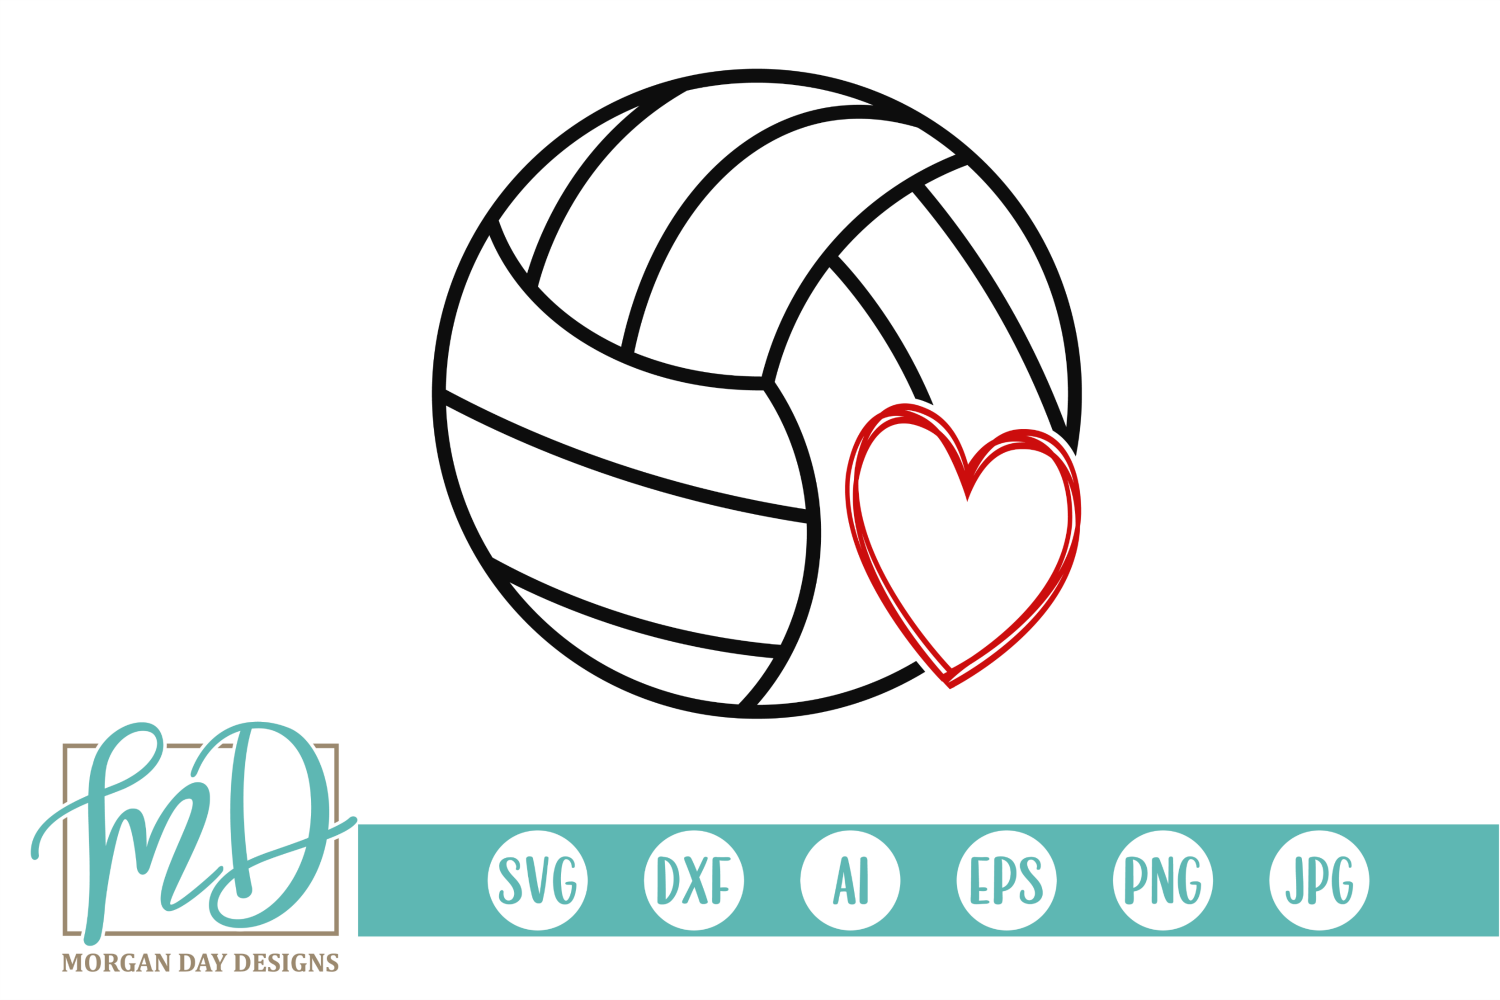 Volleyball with Heart SVG, DXF, AI, EPS, PNG, JPEG